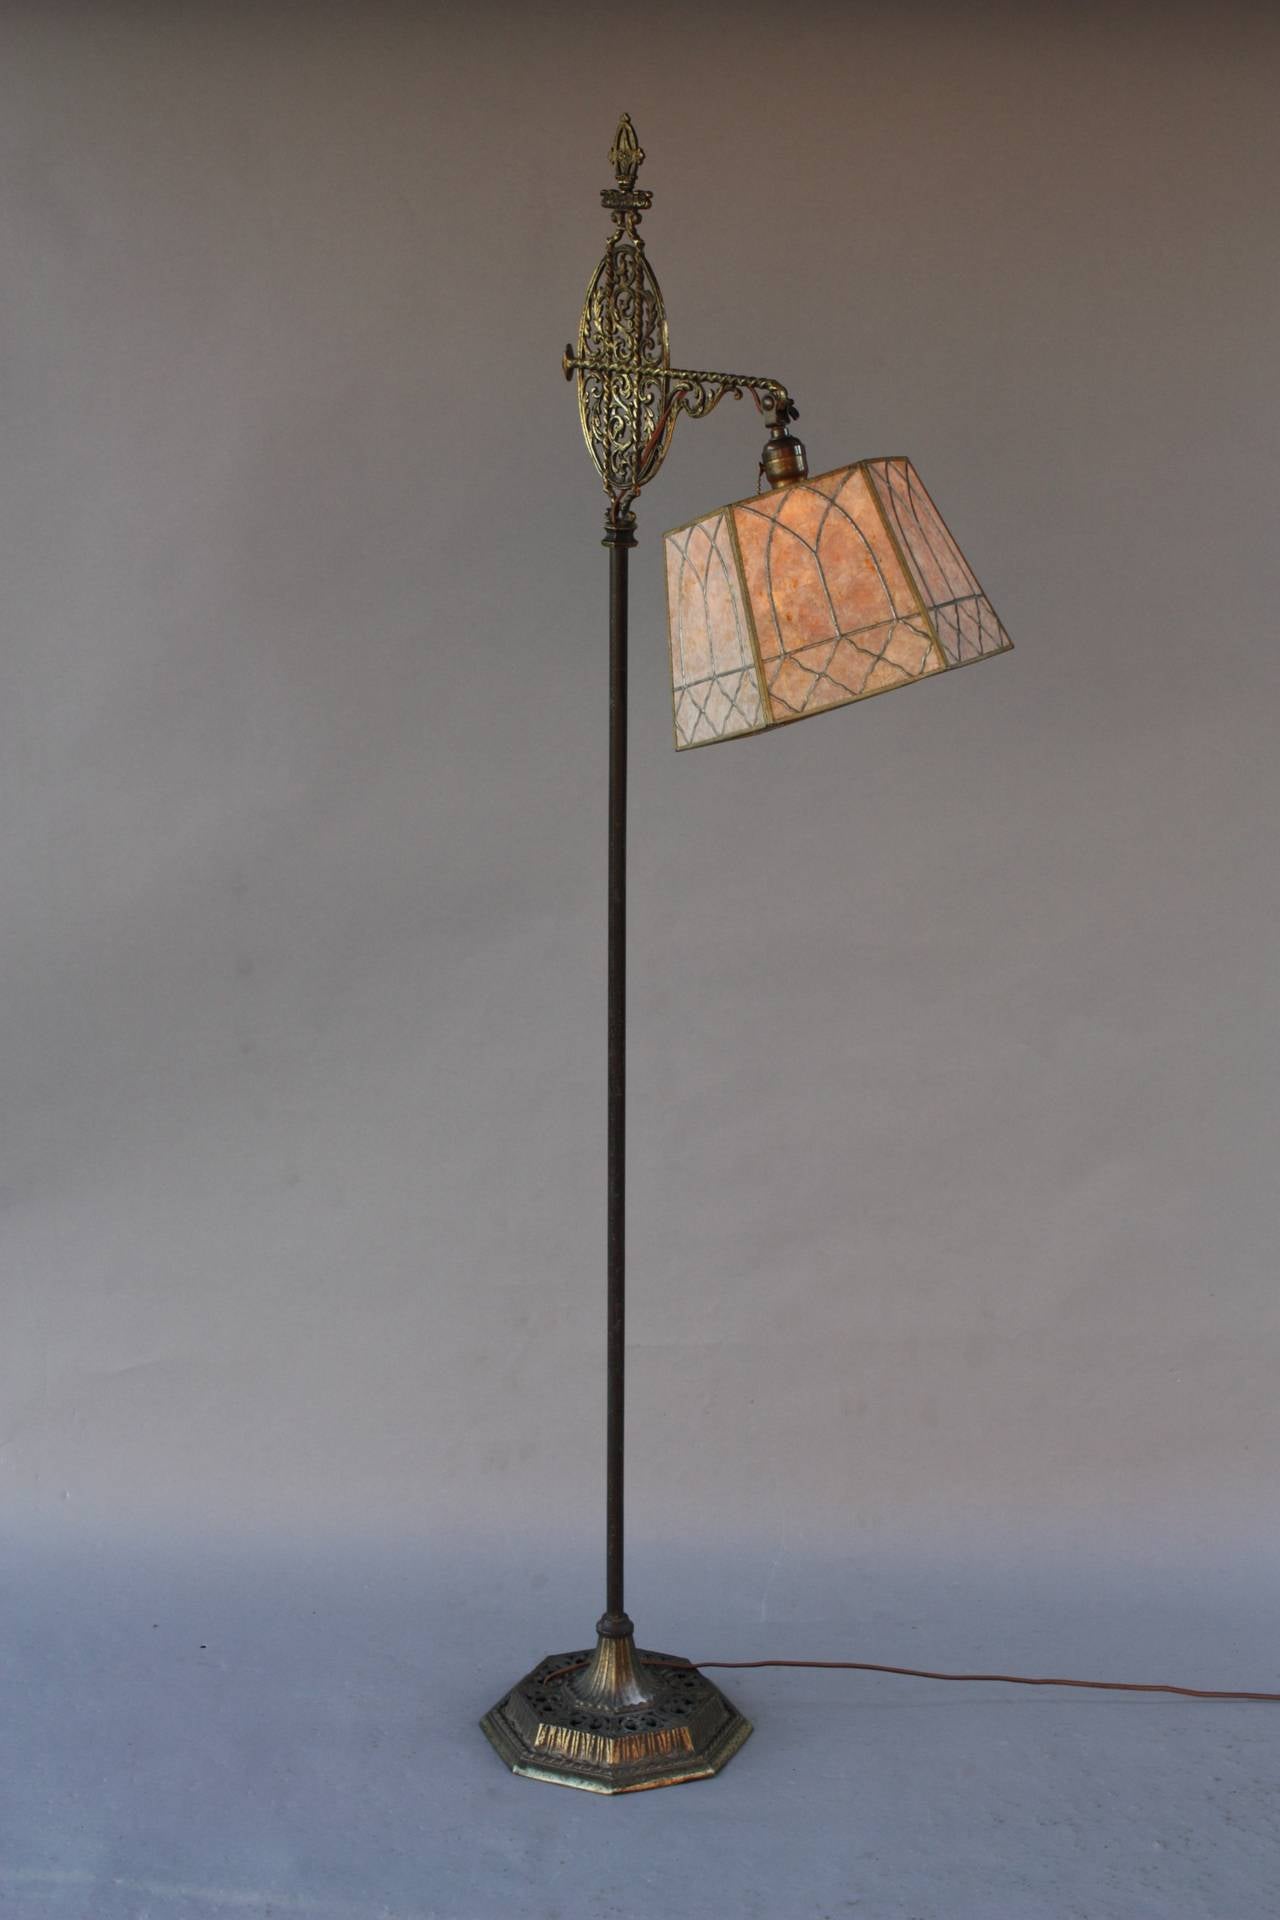 Very nice mica floor lamp with adjustable mica shade. Circa 1920's. The casting on the base is very intricate with leaf design and the shade has the classic motif of arches. Would fit in Tudor and Spanish Revival Decor.